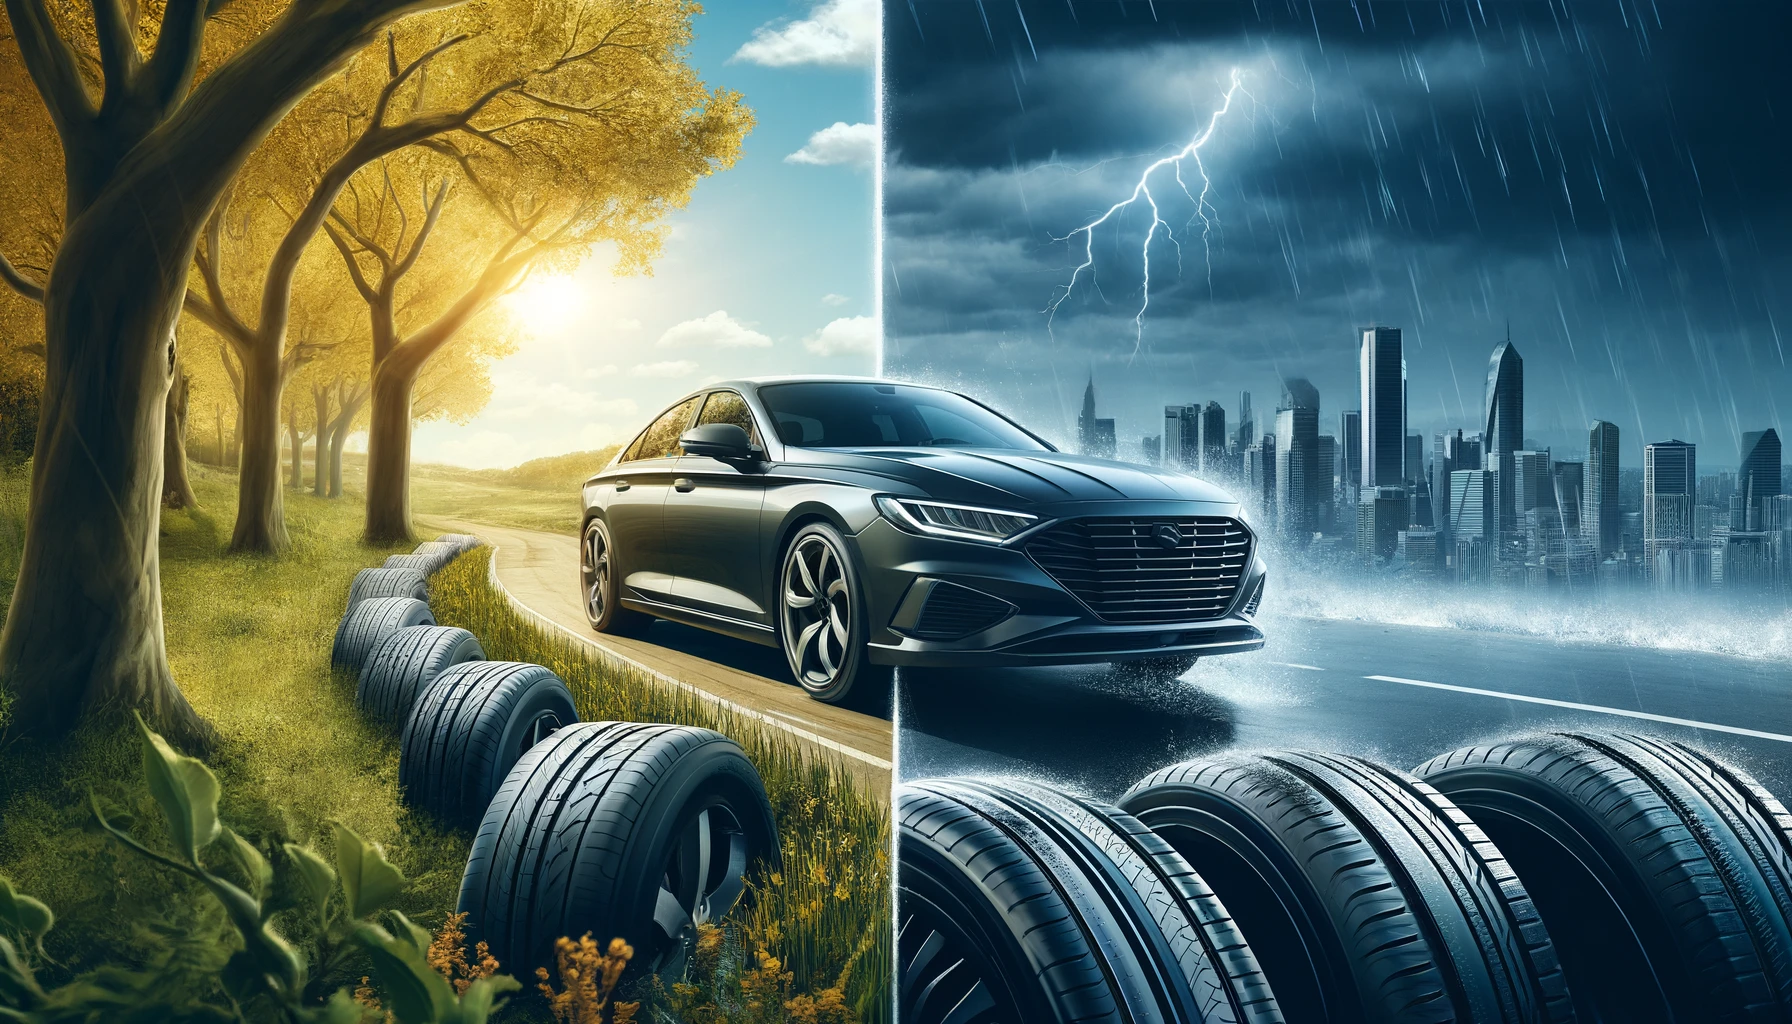 A dynamic image showcasing Pirelli all-season tires. The scene features a stylish sedan equipped with Pirelli all-season tires, driving through a landscape that transitions from a sunny countryside road on one side to a rainy urban street on the other. This represents the versatility of the tires under different weather conditions. The car is sleek, highlighting the tires' ability to perform in both dry and wet environments effectively. Trees in full bloom and city skyscrapers in the backdrop symbolize the transition between seasons. The image is in a 16:9 aspect ratio.